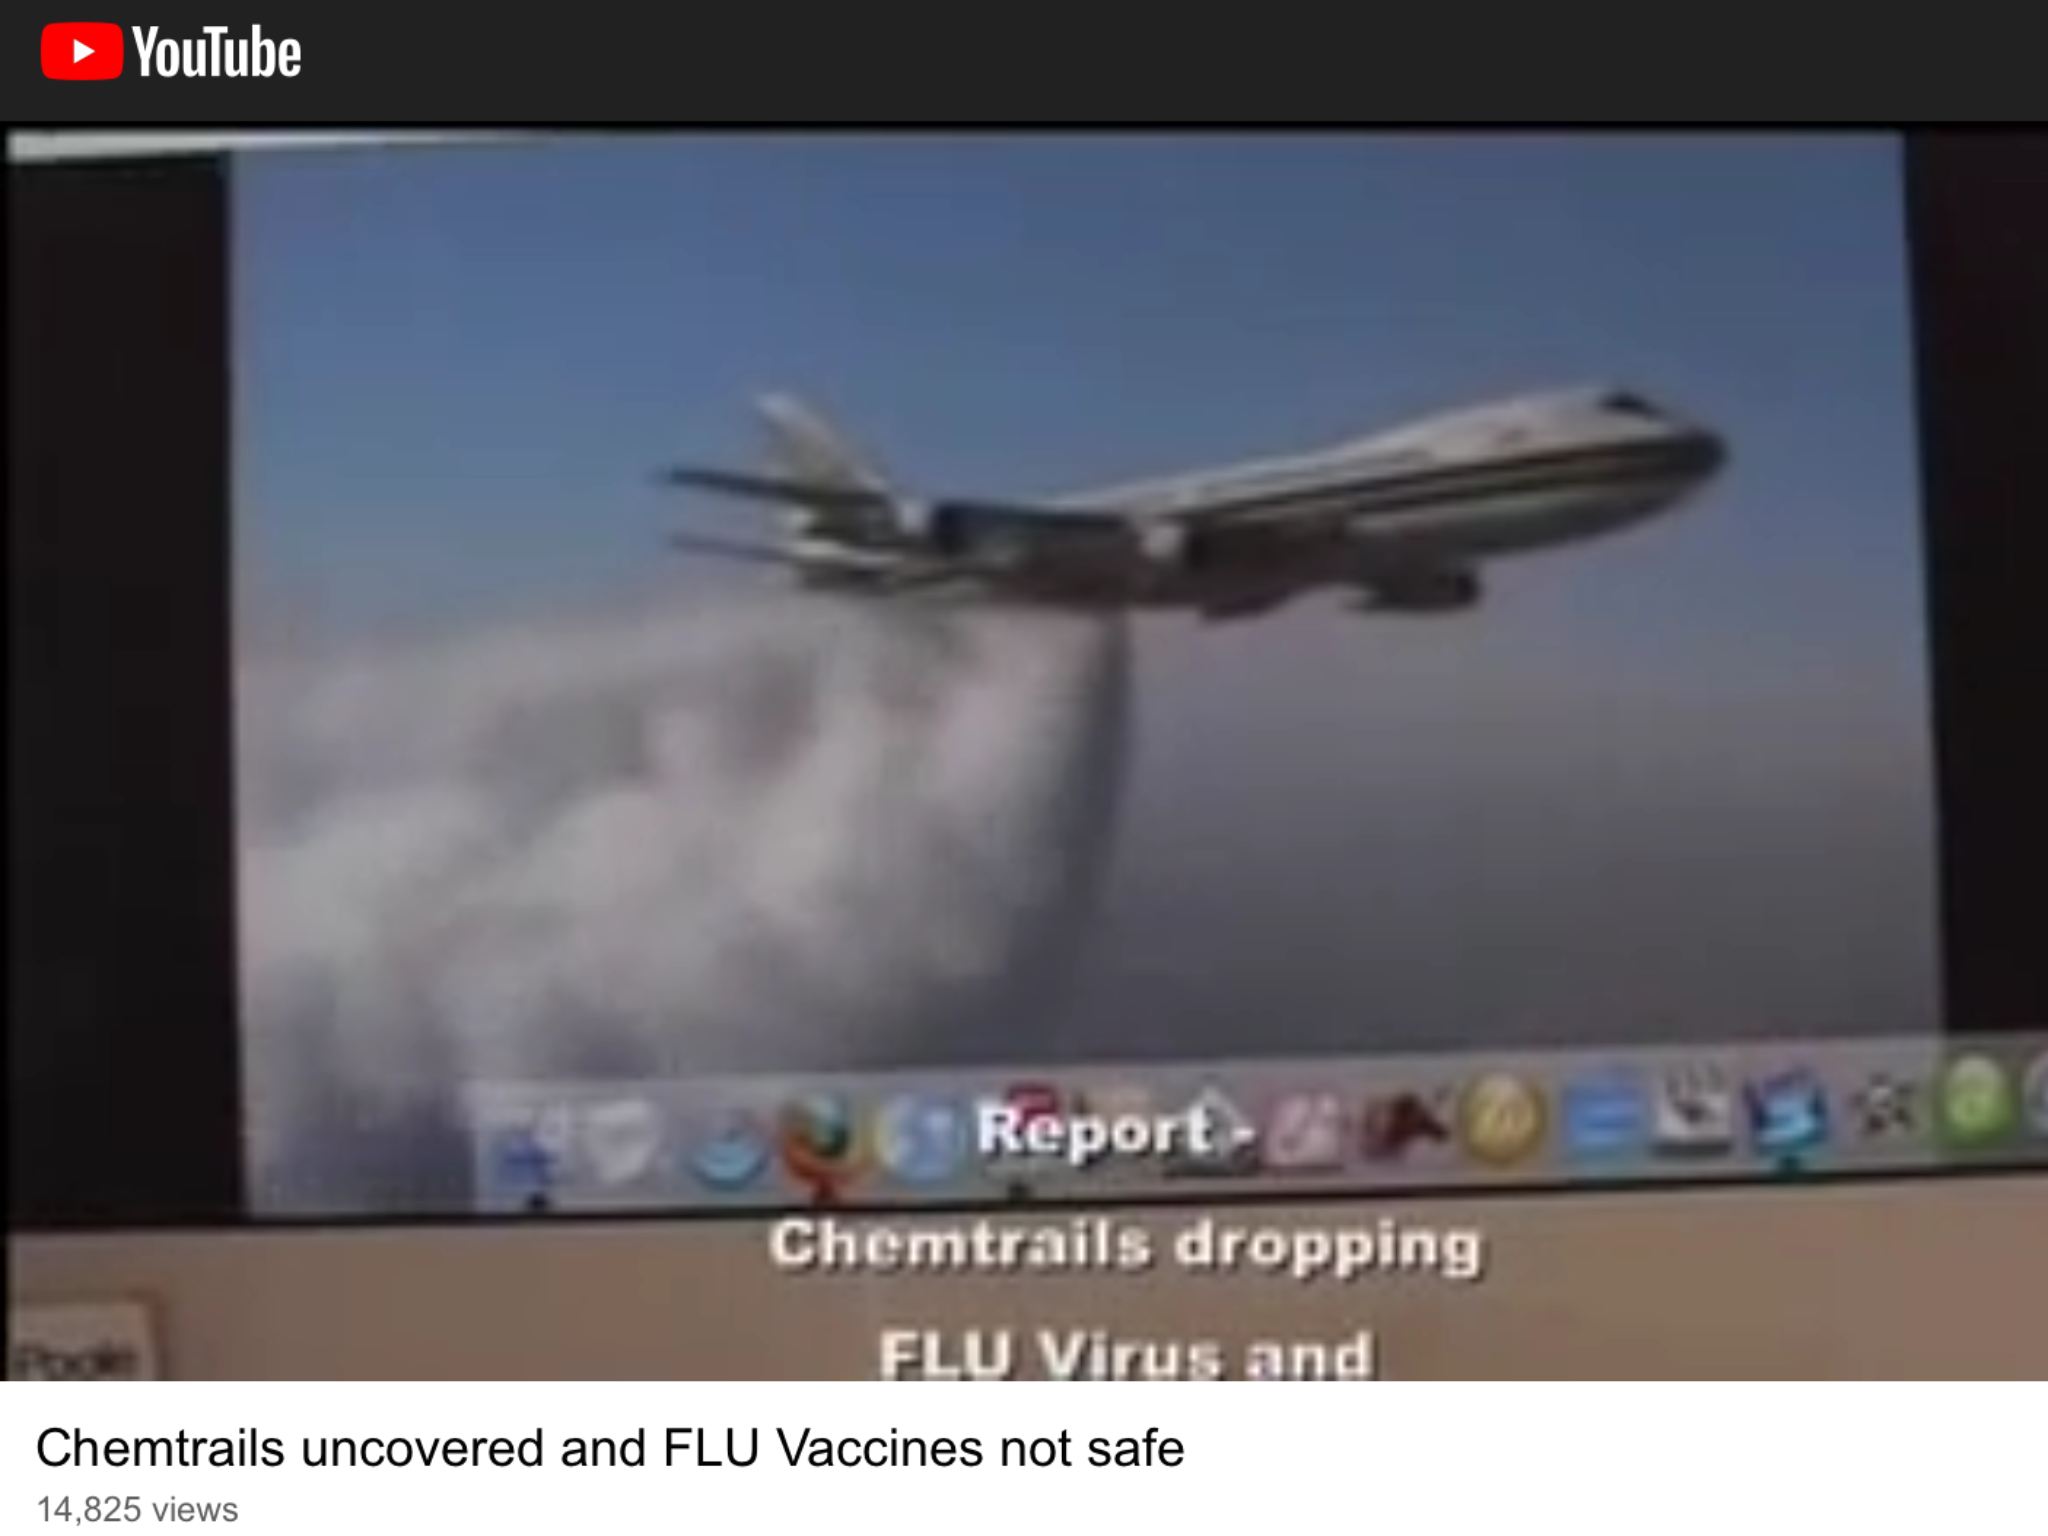 VIRUS BEING SPREAD BY PLANES AKA CHEMTRAILS